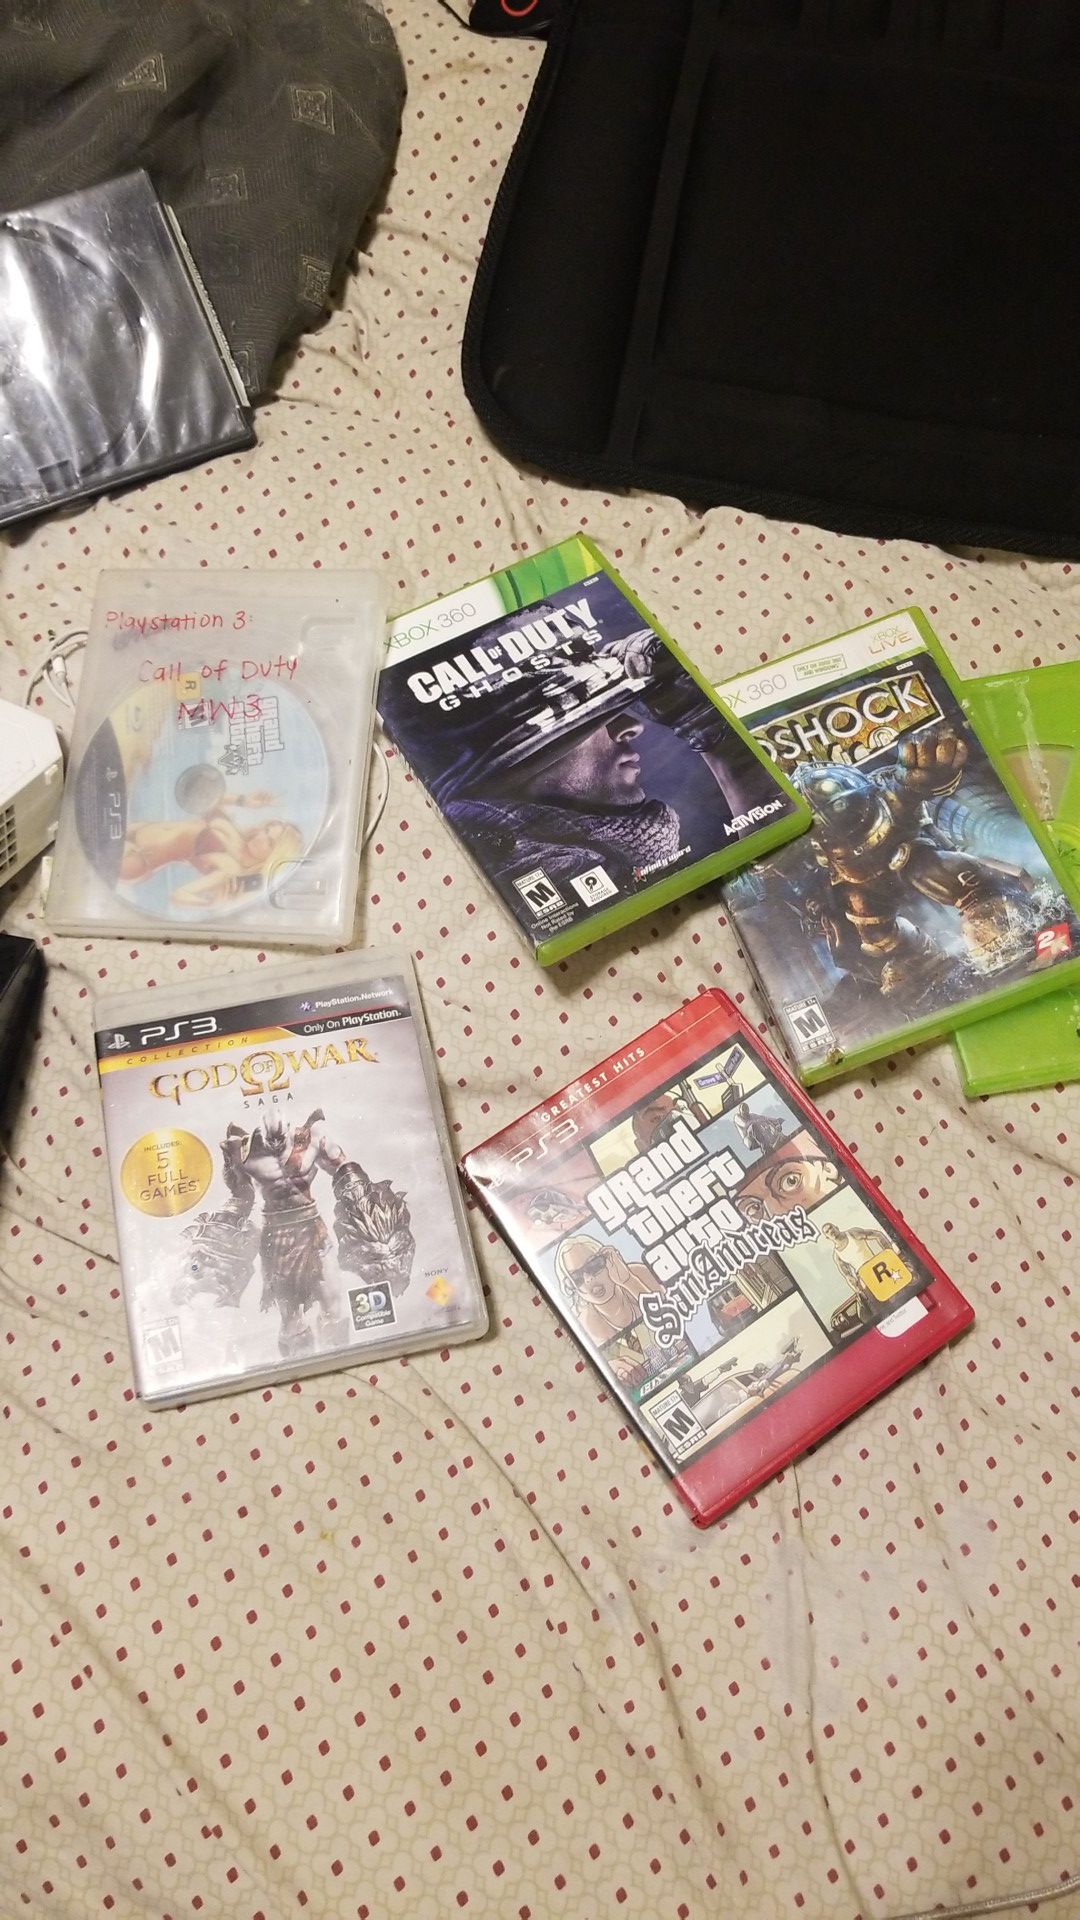 Xbox 360 and PS3 games